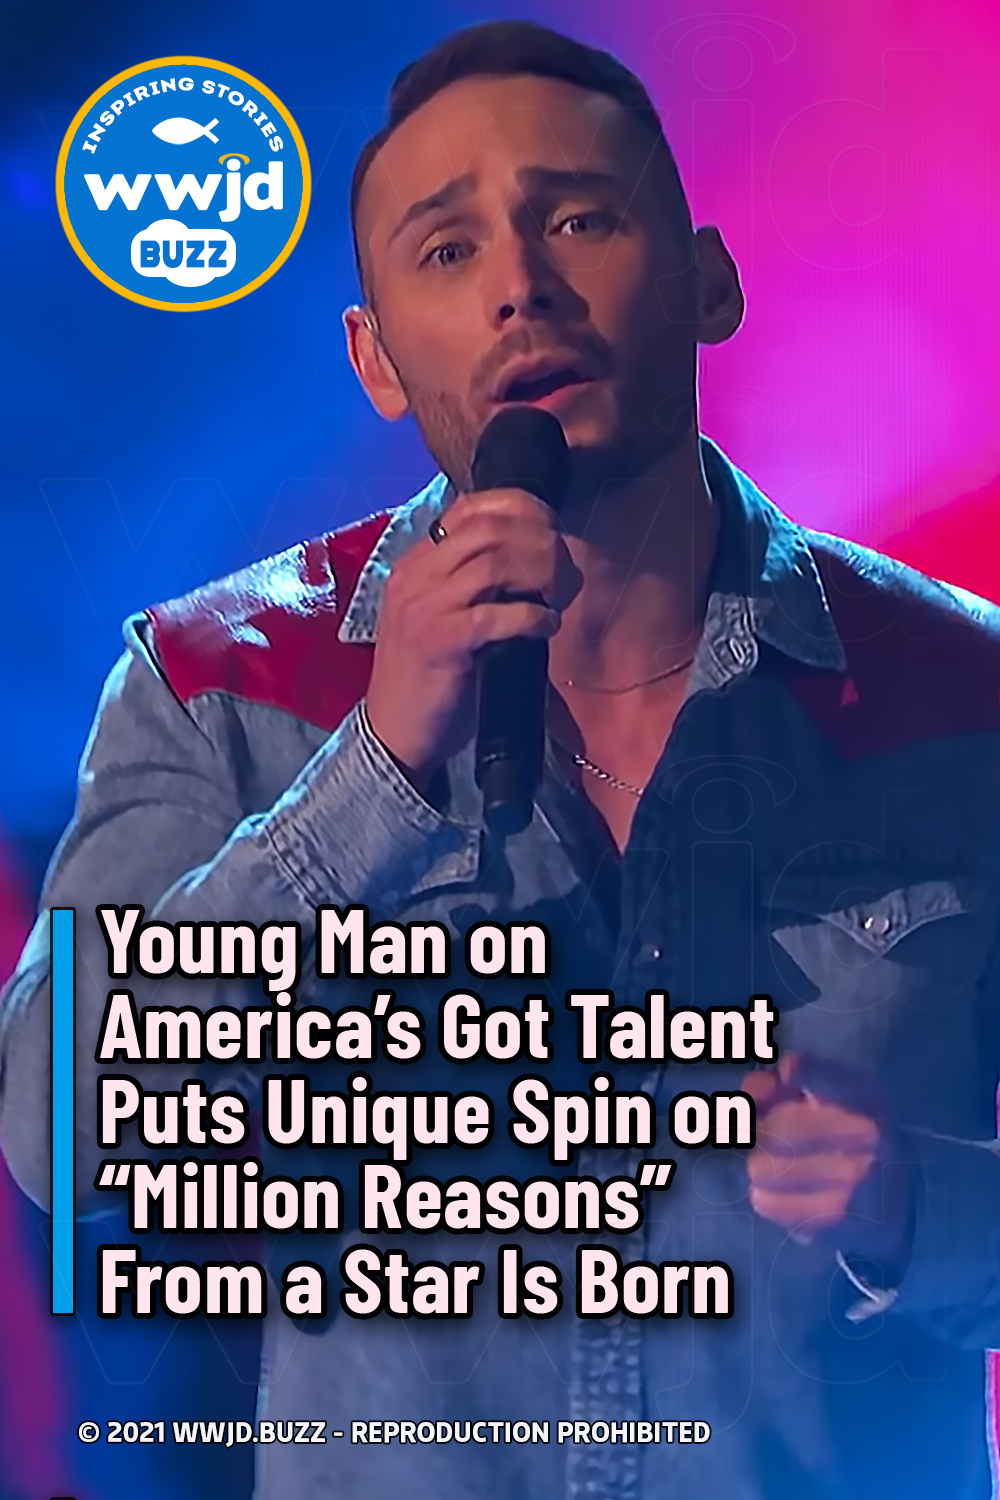 Young Man on America’s Got Talent Puts Unique Spin on “Million Reasons ...